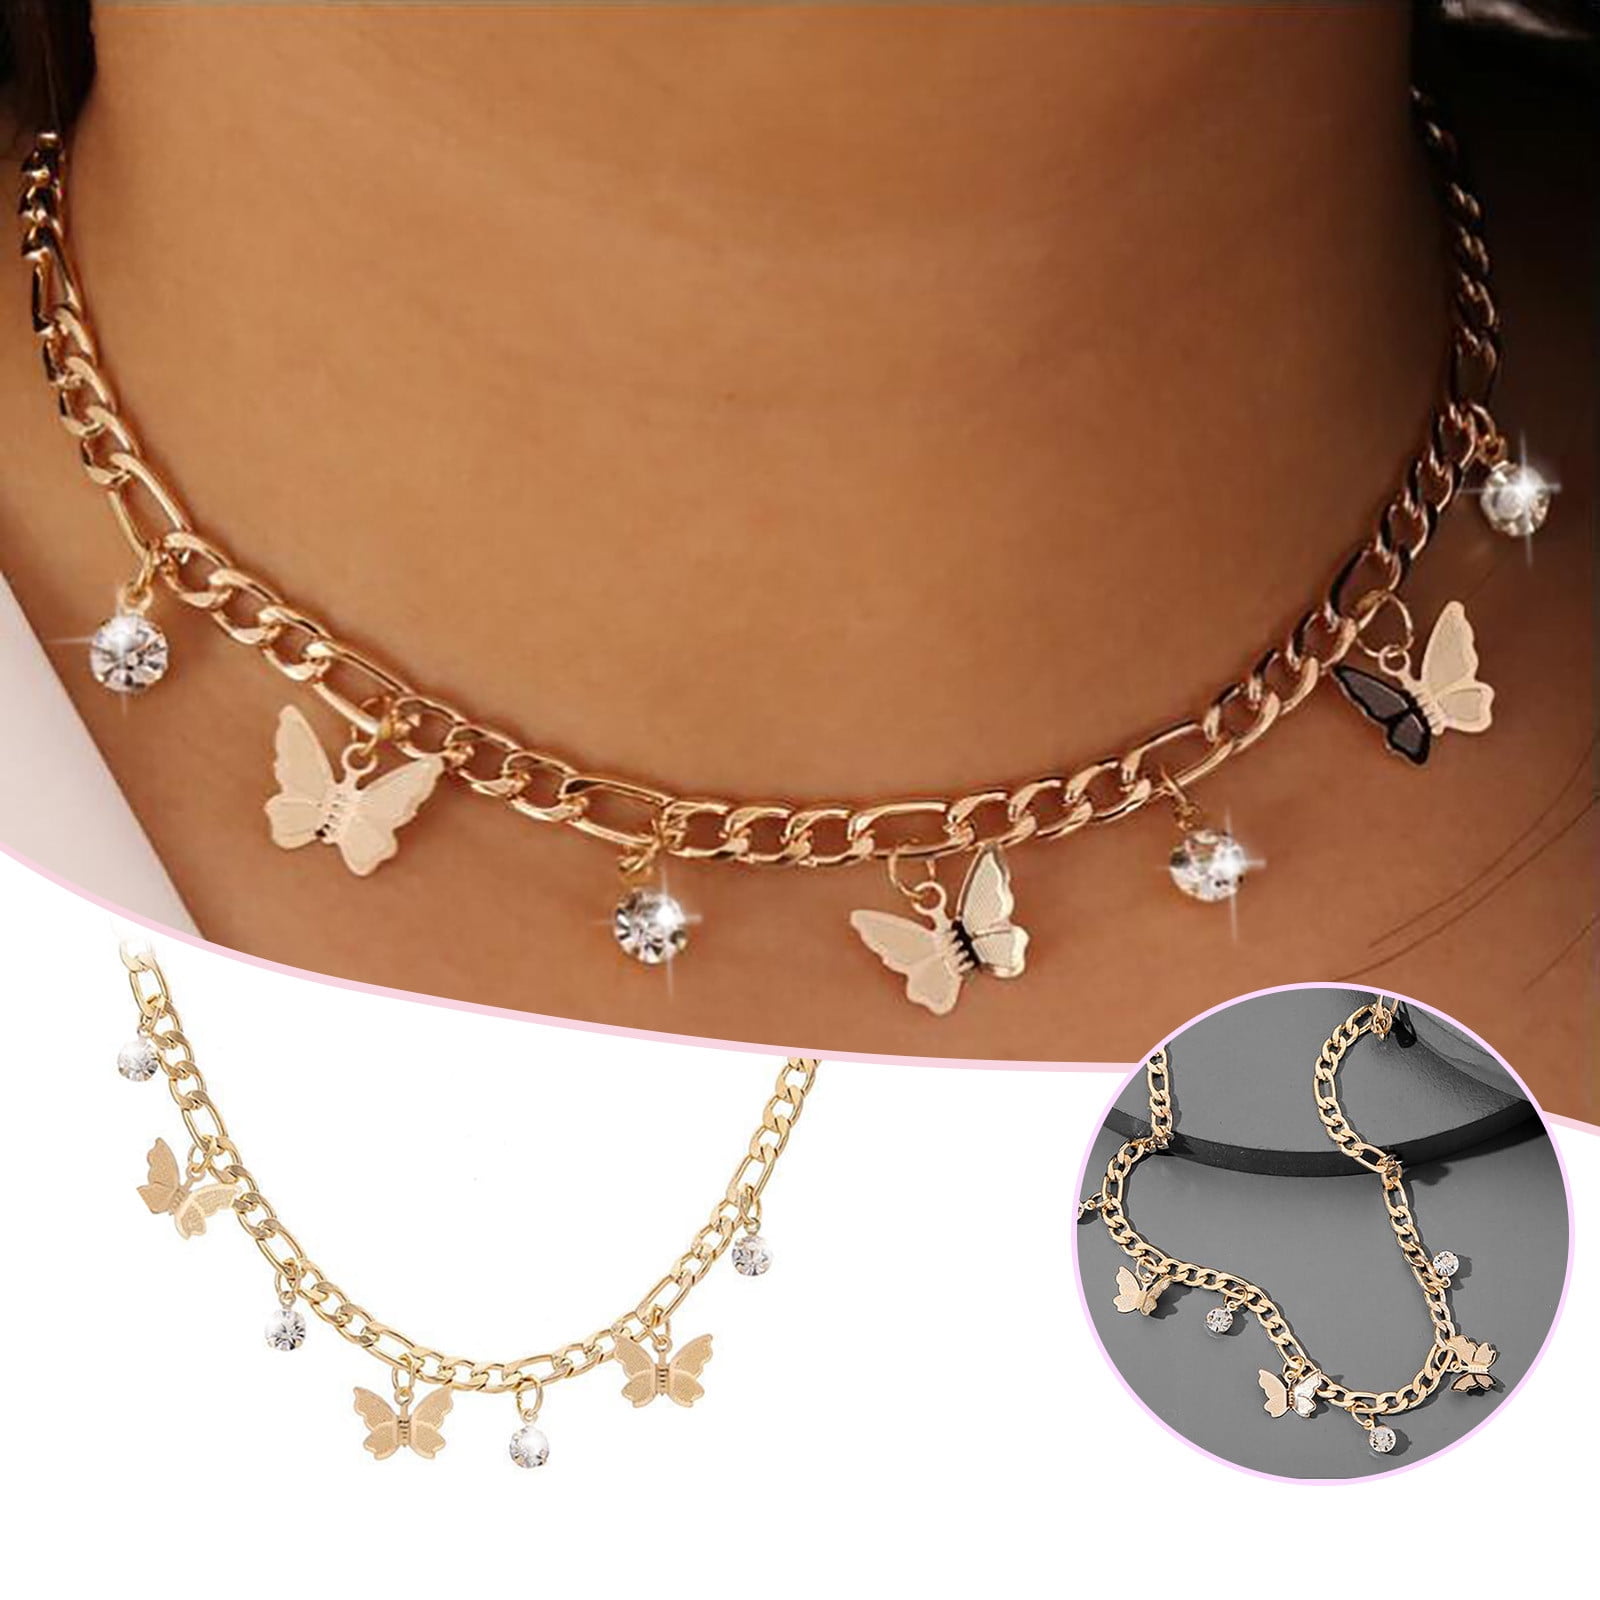 Jewelry Necklaces Pendants Pendant Choker Necklace Women Teen Girls Elegant  Rhinestone Tassels Clavicle Chain Necklace Collar Jewelry Gifts Accessories  for Women 